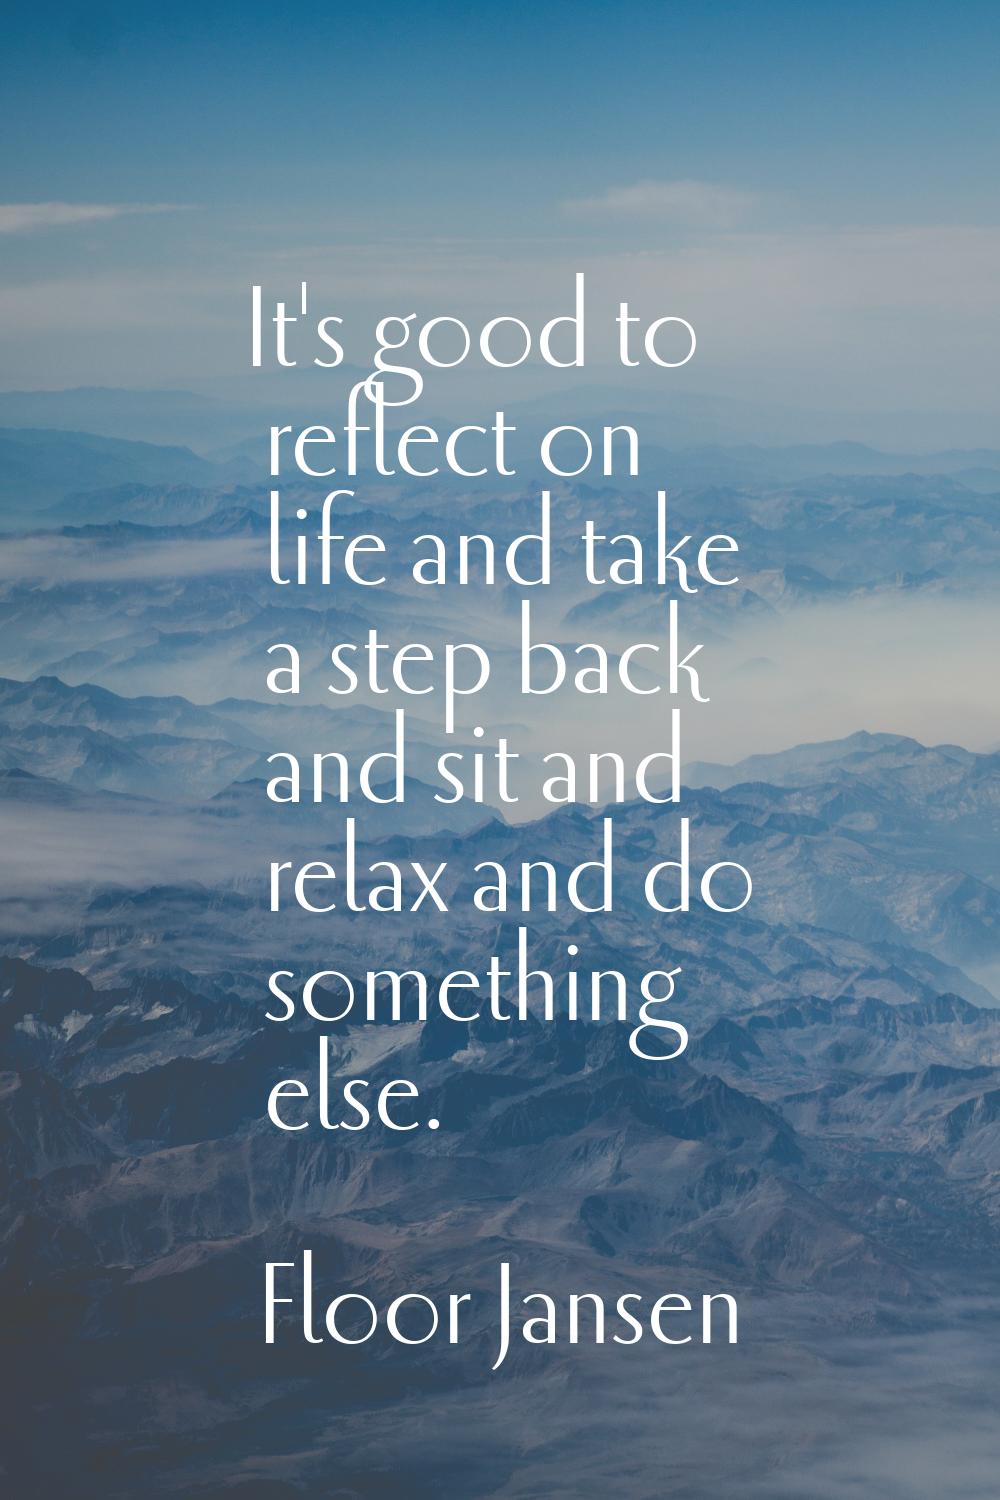 It's good to reflect on life and take a step back and sit and relax and do something else.